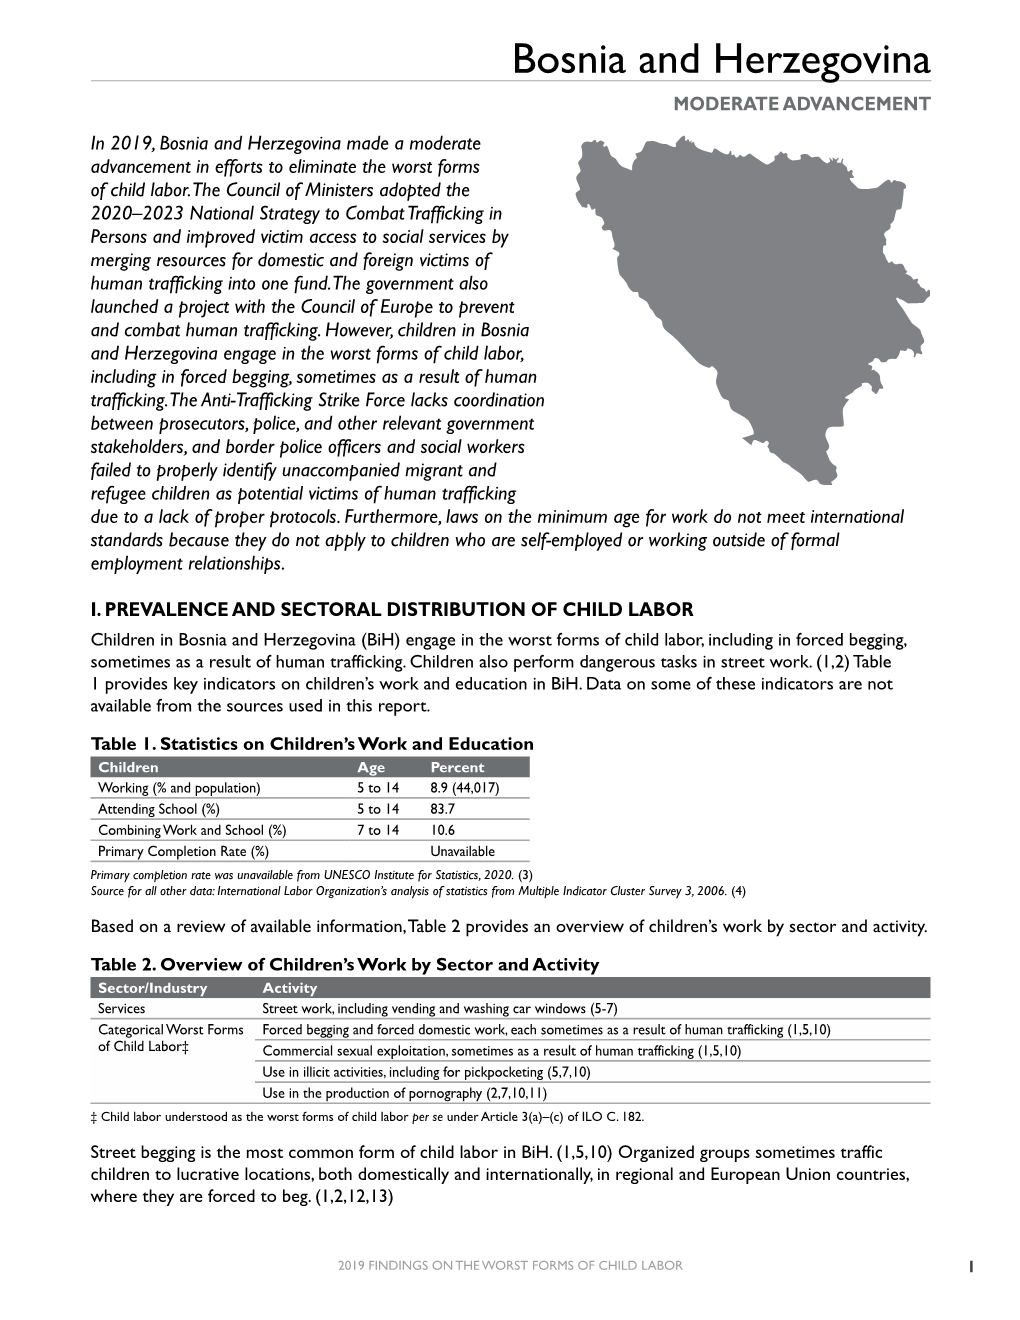 2019 Findings on the Worst Forms of Child Labor: Bosnia and Herzegovina